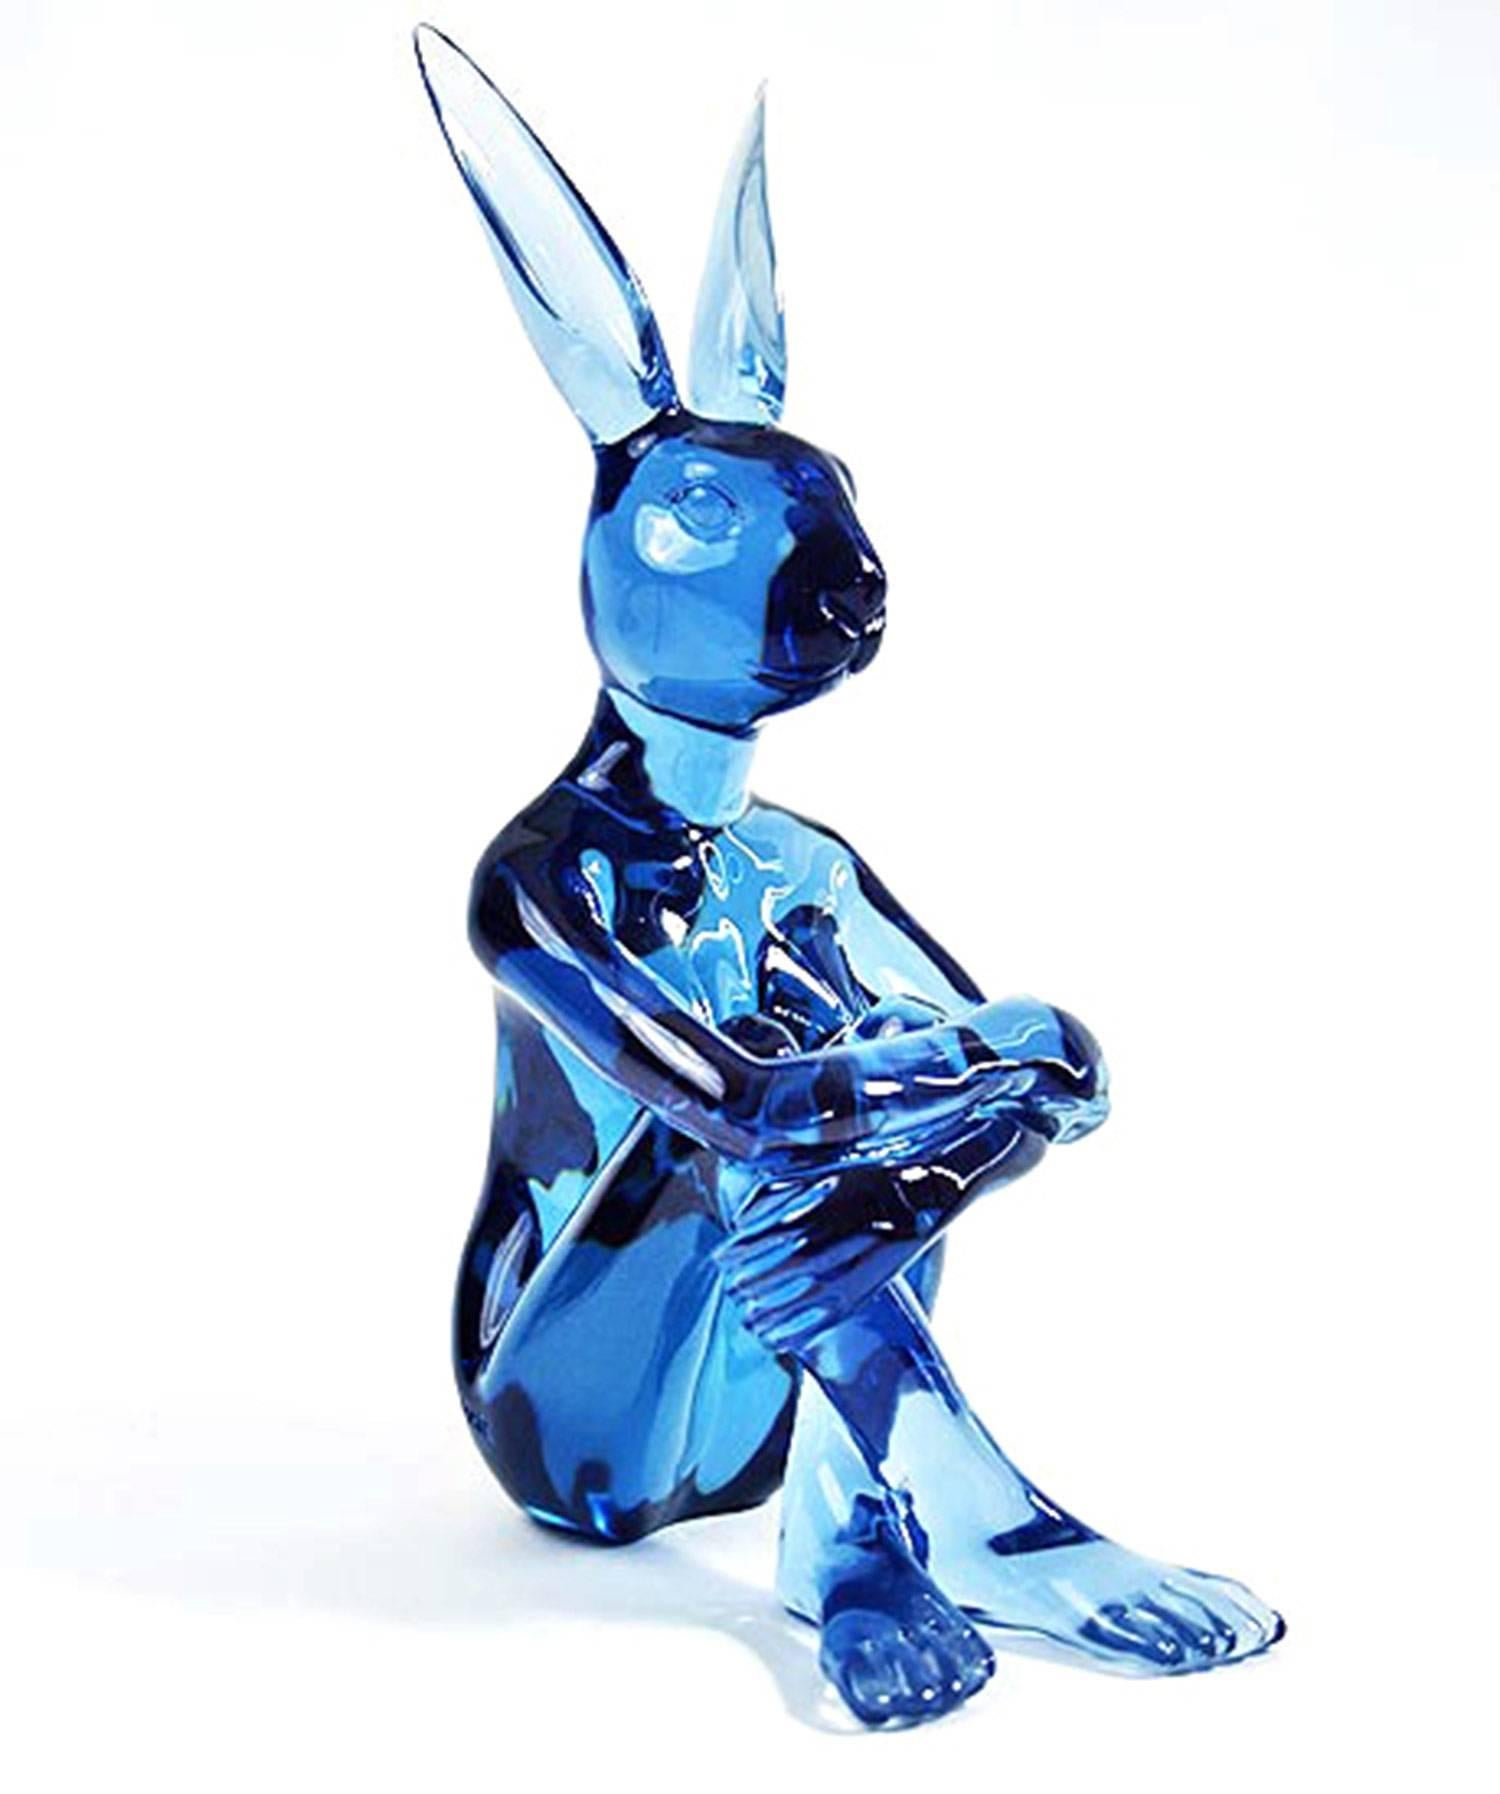 Gillie and Marc Schattner Abstract Sculpture - Lolly Rabbitgirl (Royal Blue)